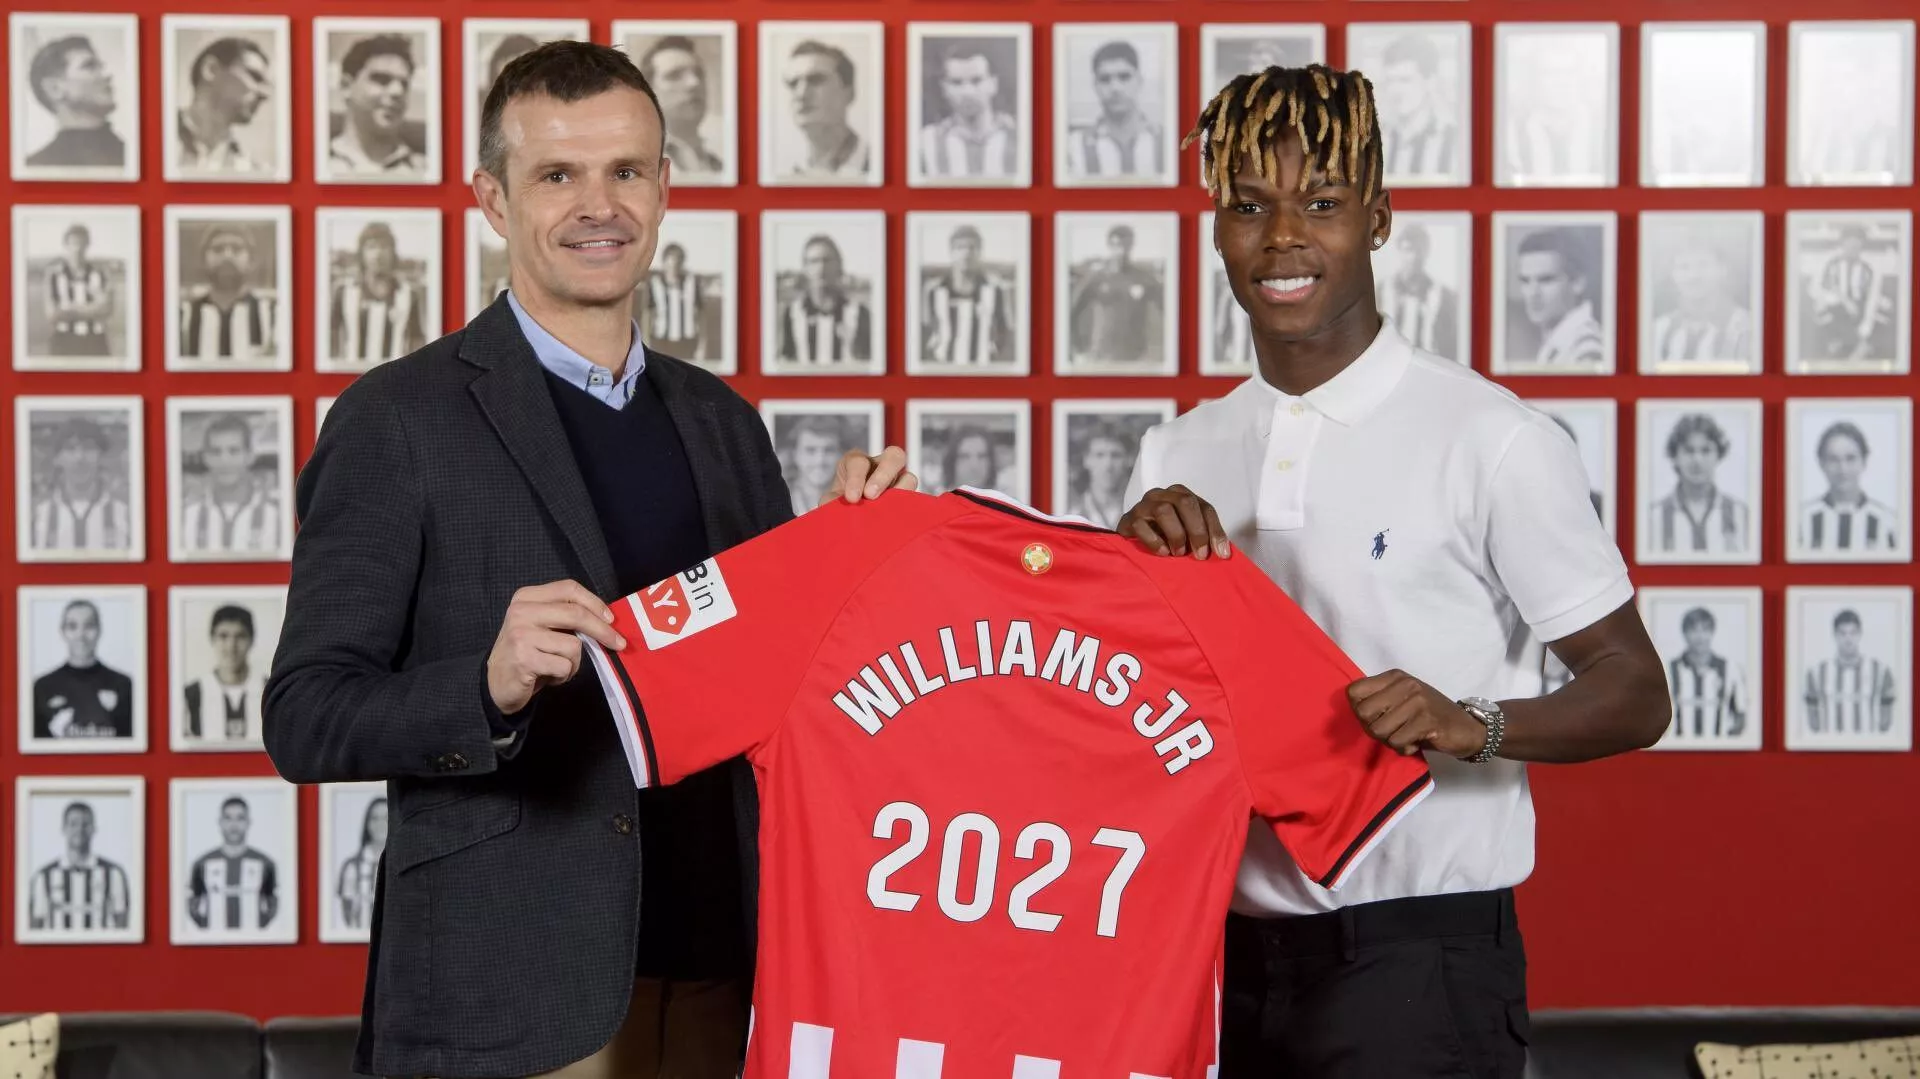 Nico Williams extends contract at Athletic Bilbao until 2027